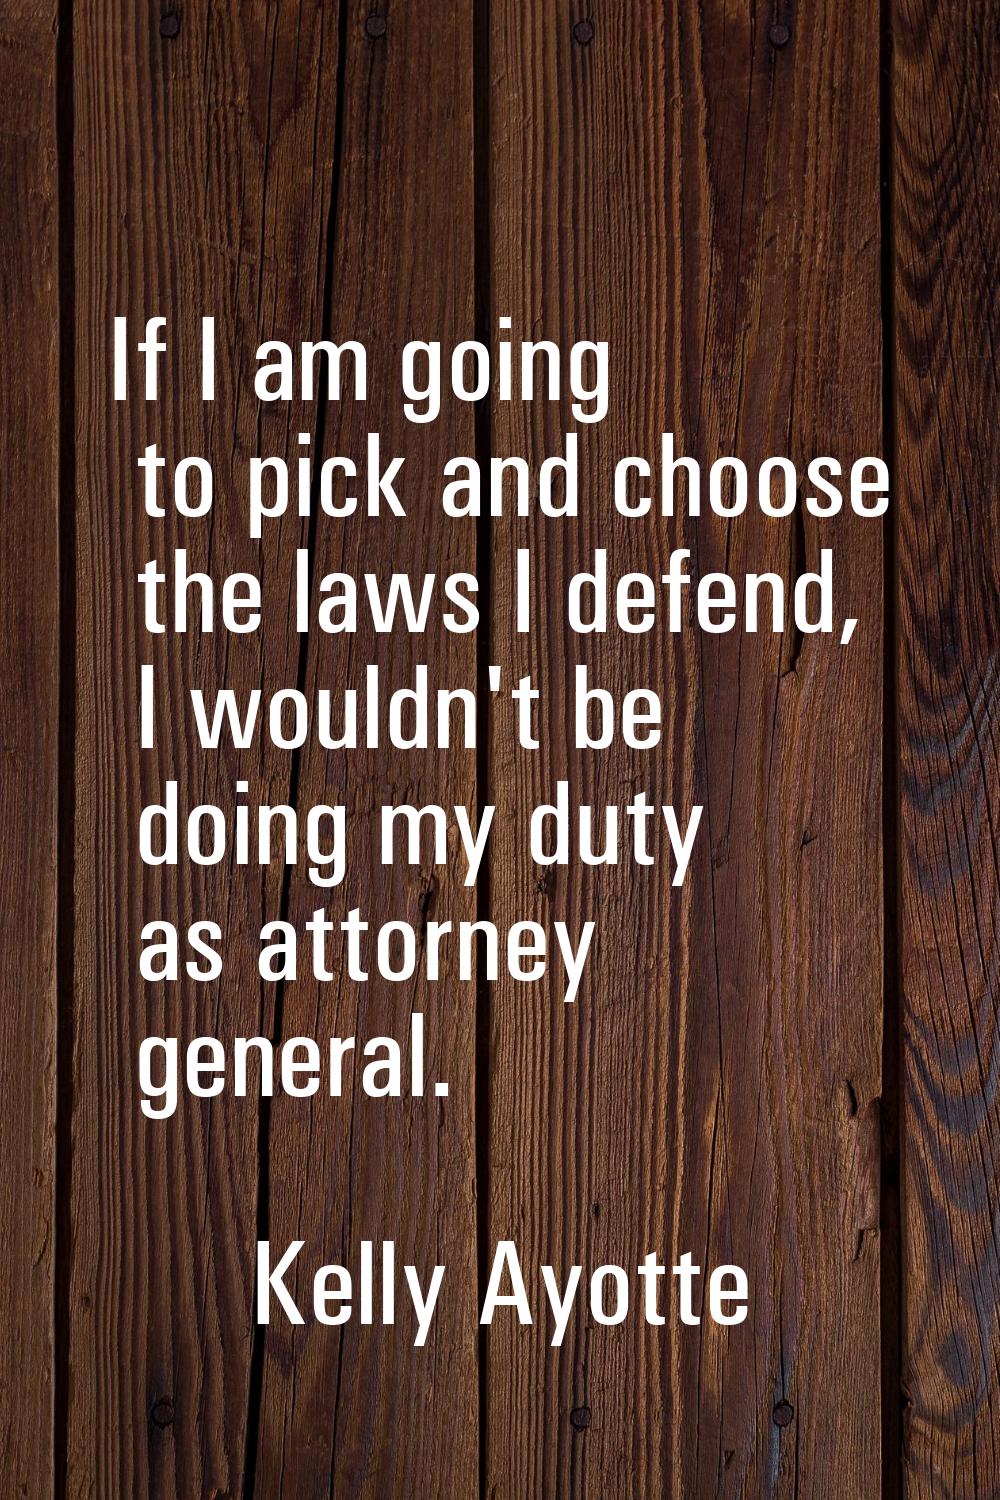 If I am going to pick and choose the laws I defend, I wouldn't be doing my duty as attorney general